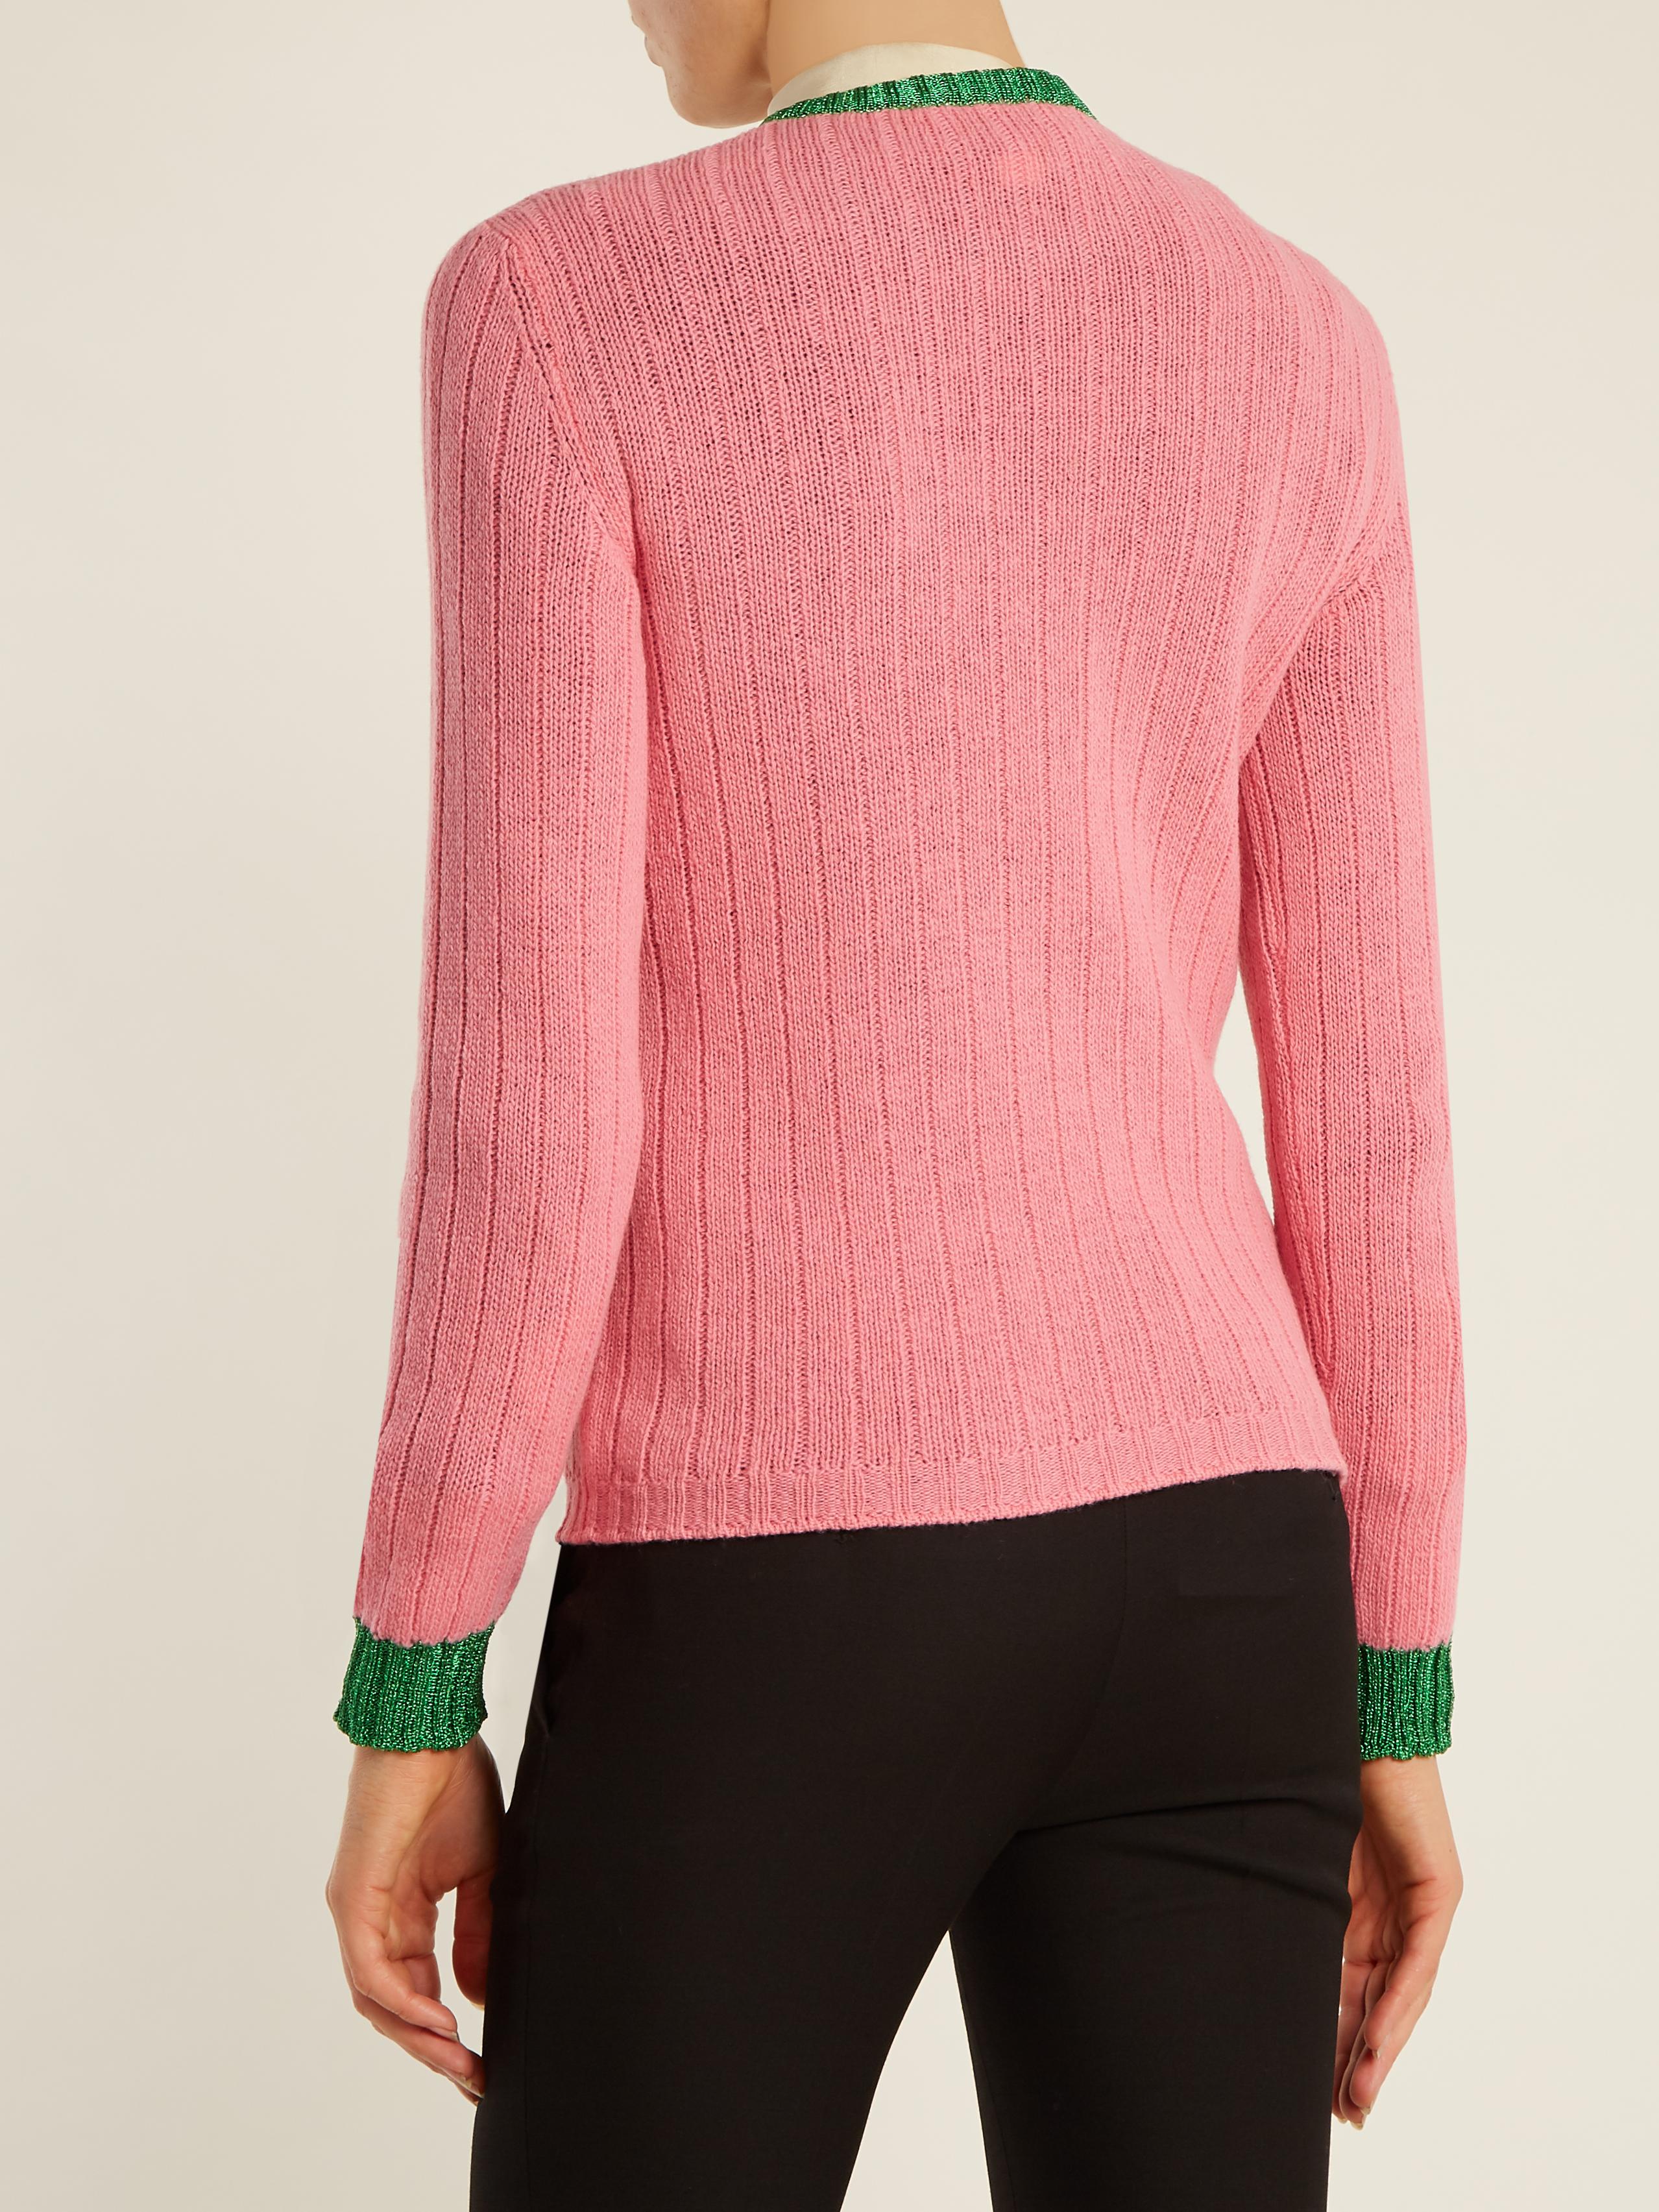 Lyst - Gucci Floral-embroidered Ribbed-knit Wool Sweater in Pink